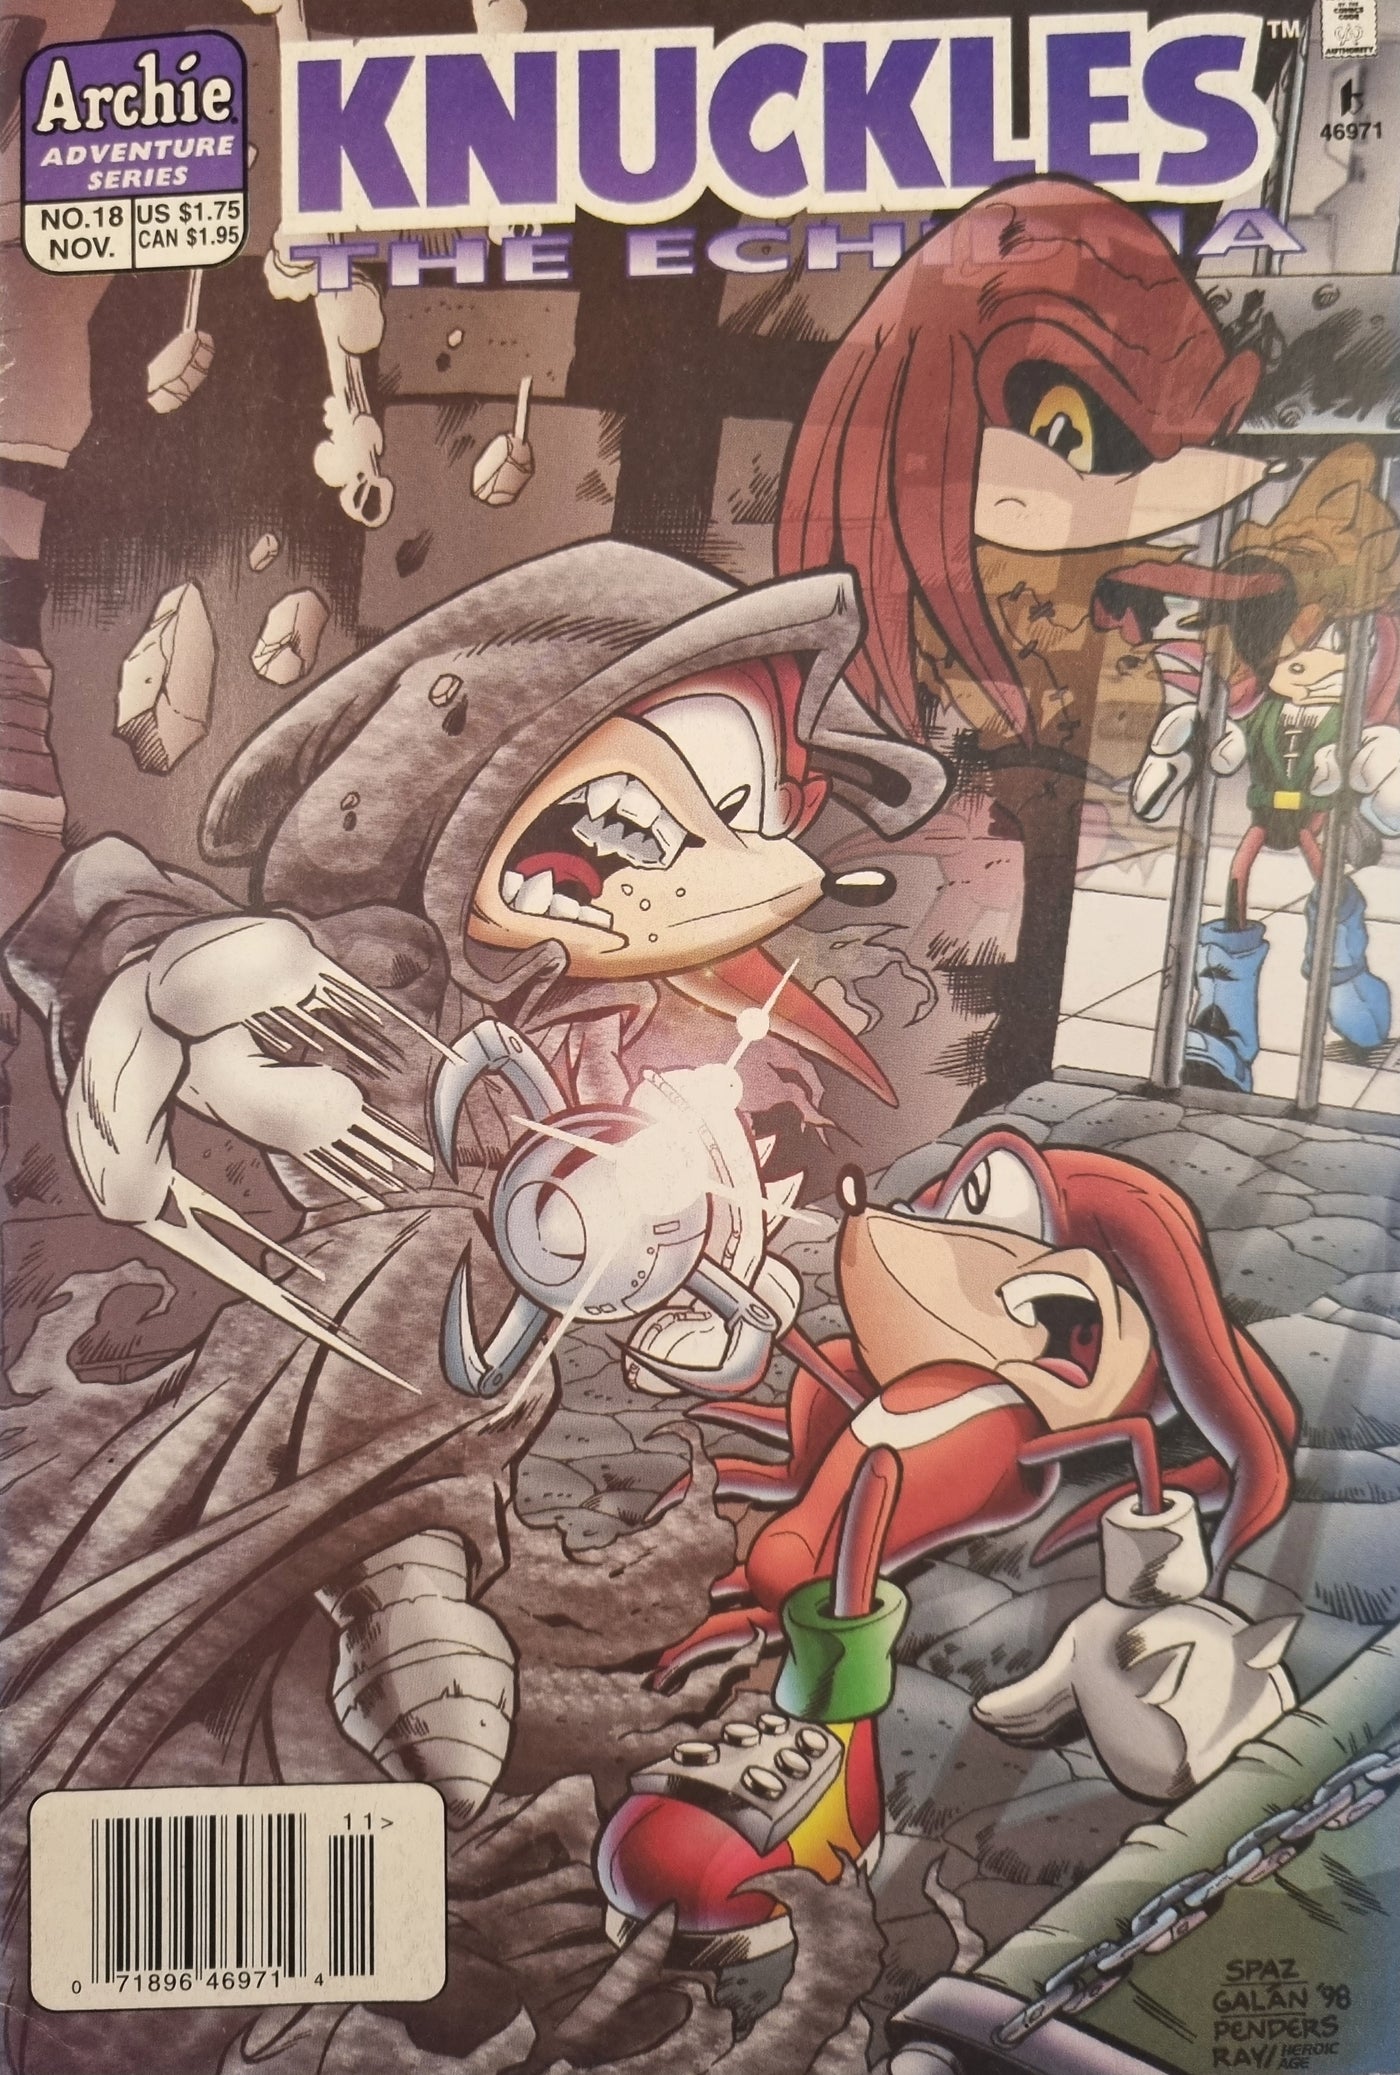 Knuckles the Echidna #18